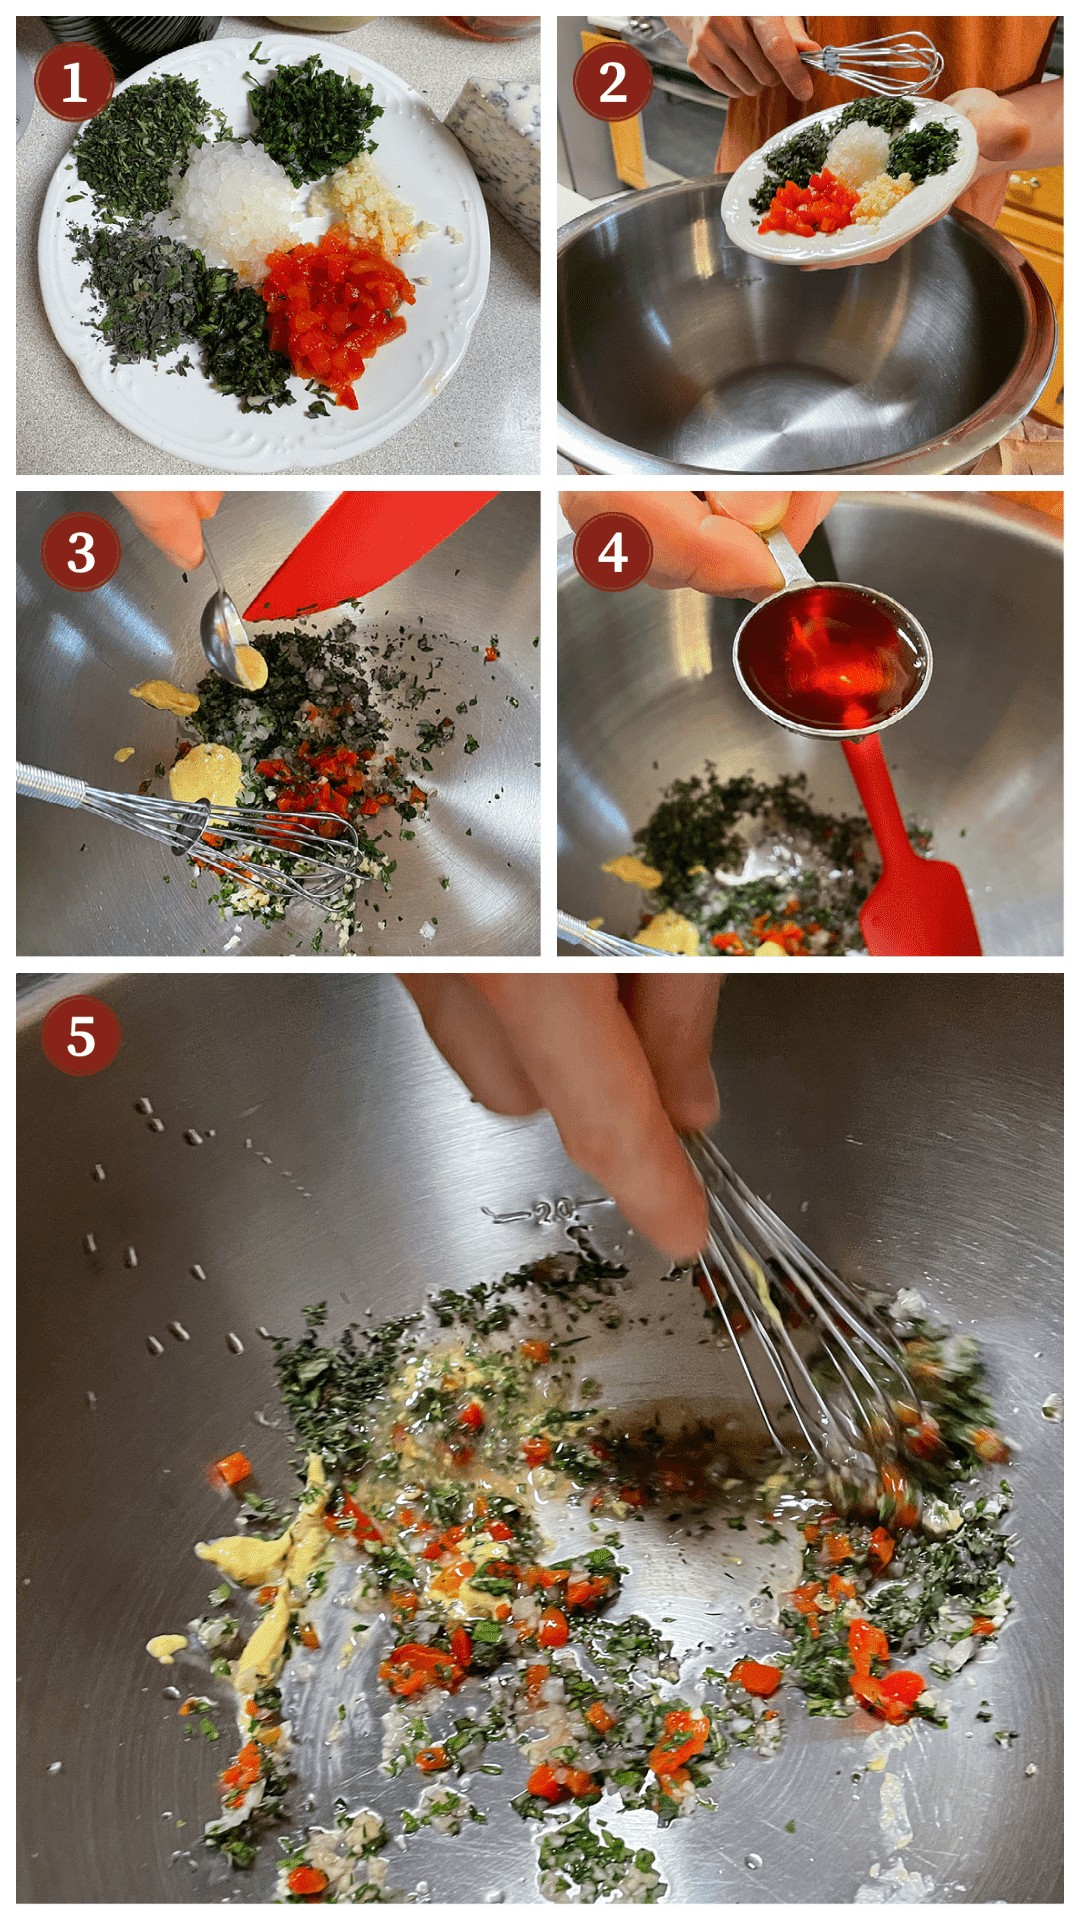 A collage of images showing how to make royal street salad, steps 1 - 5.